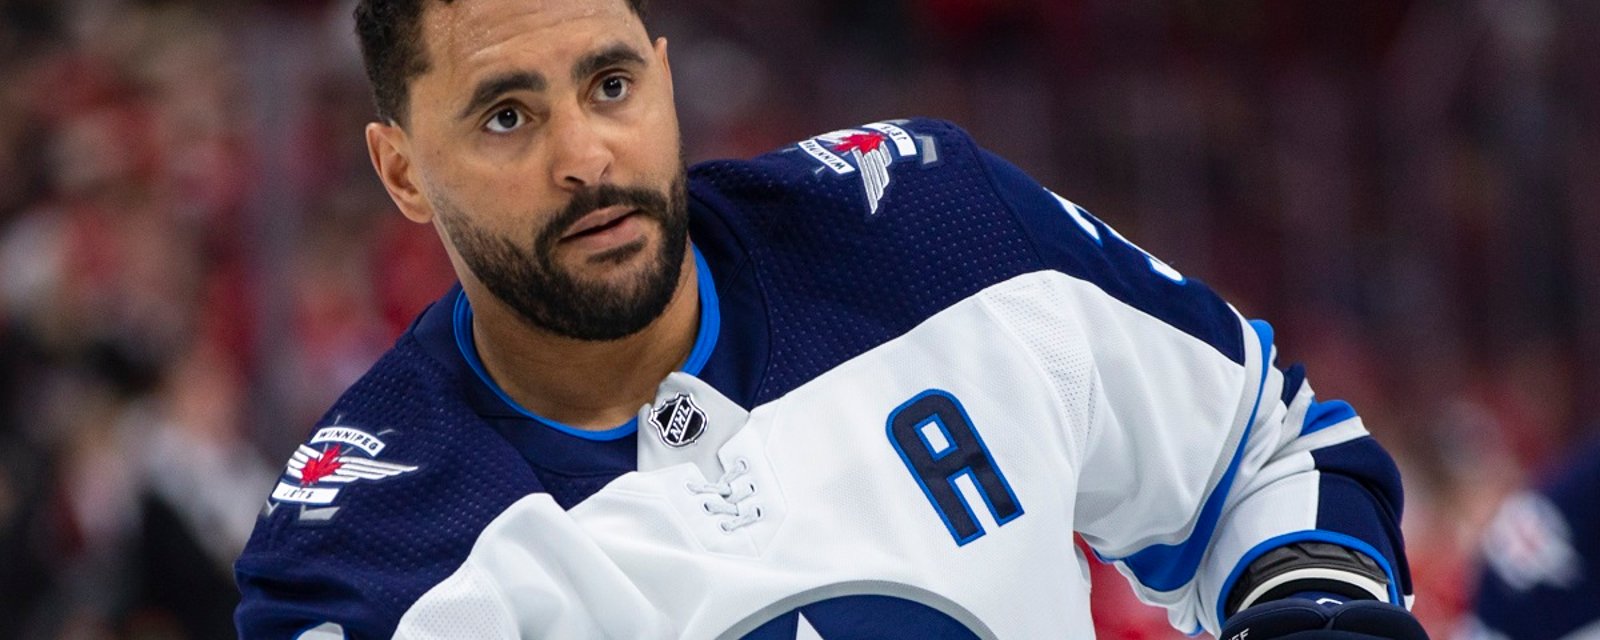 Dustin Byfuglien's dispute with the Jets has taken a drastic turn.